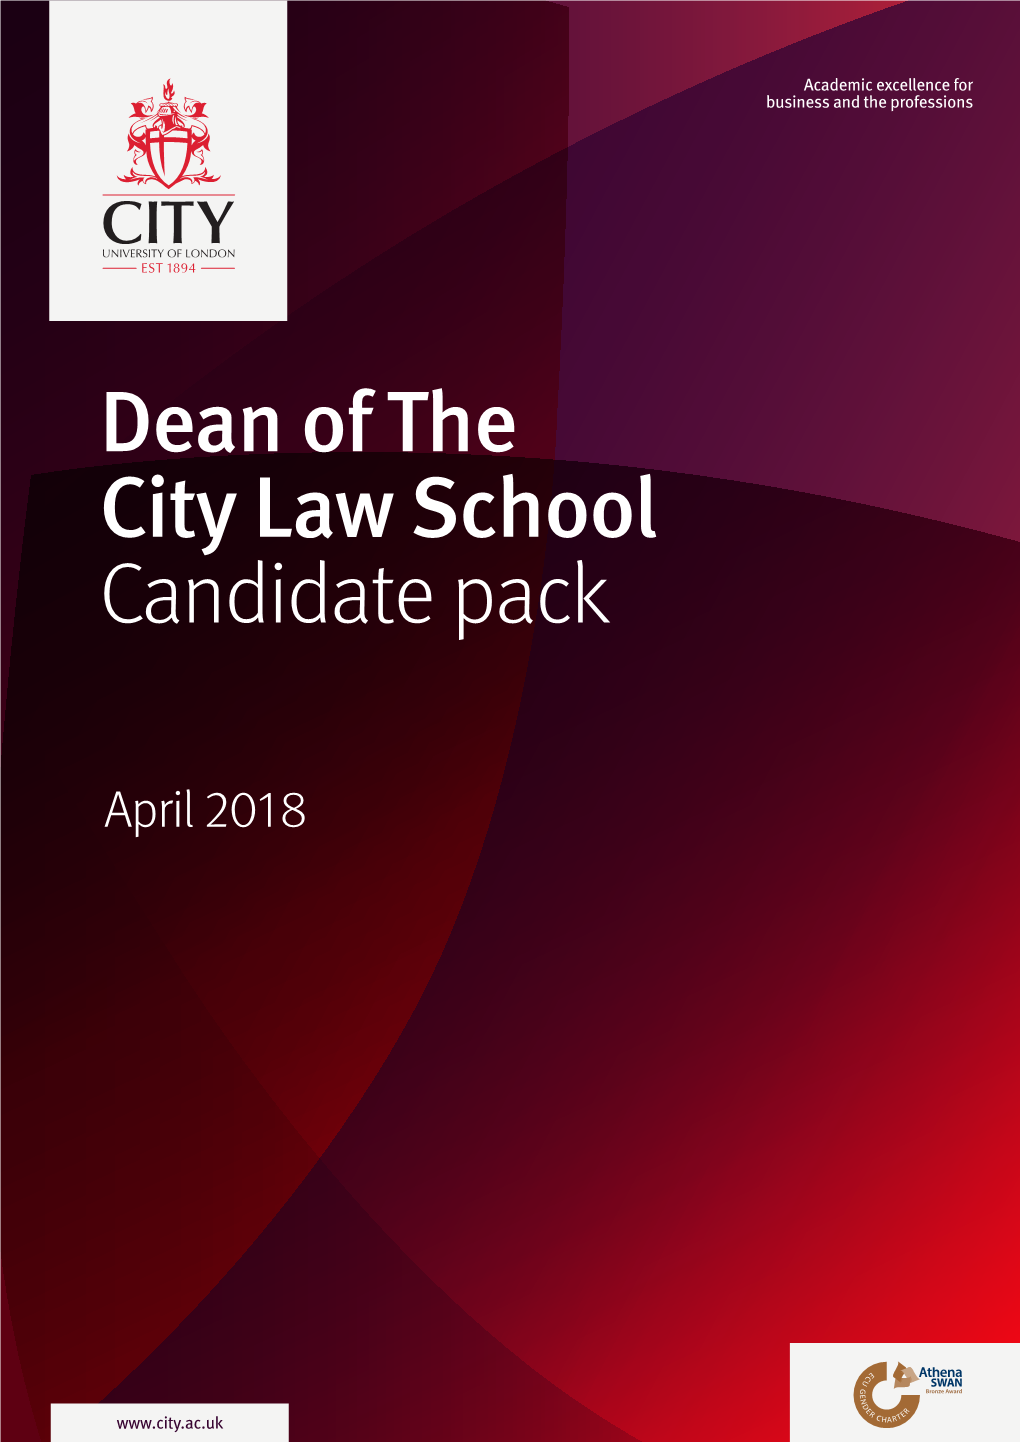 Dean of the City Law School Candidate Pack